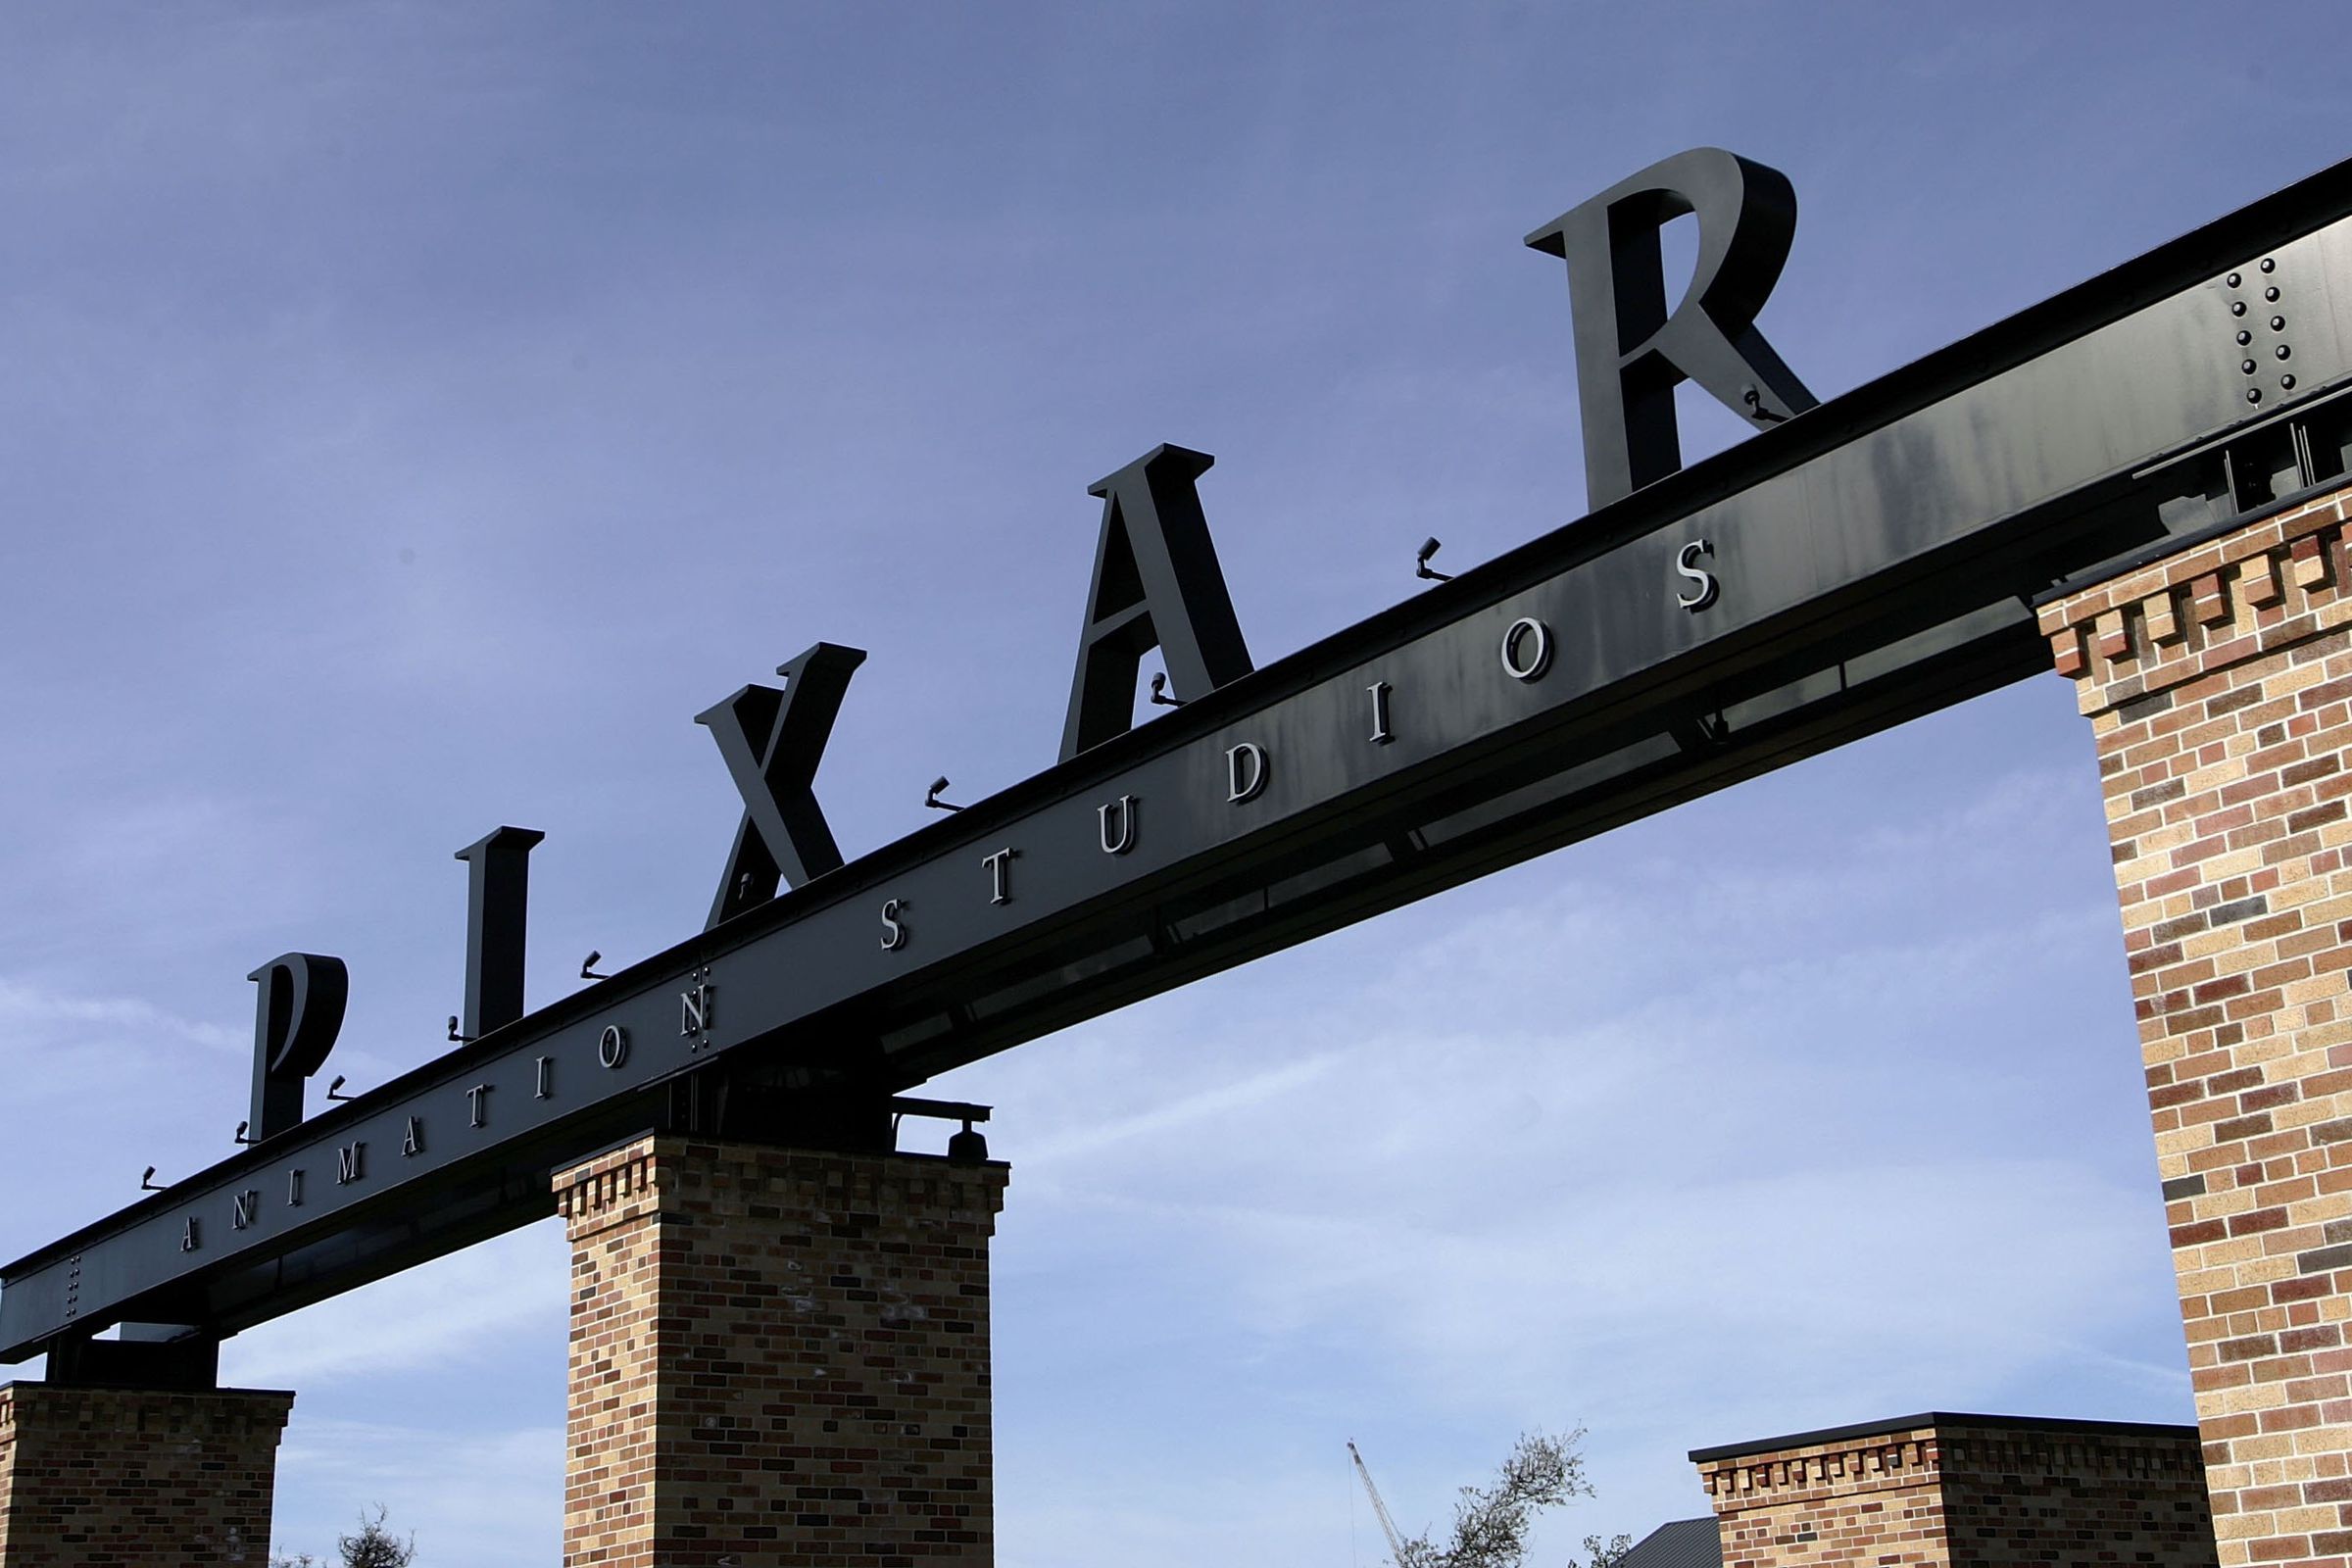 The Pixar logo is seen at the main gate of Pixar Animation Studios on January 19th, 2006, in Emeryville, California.